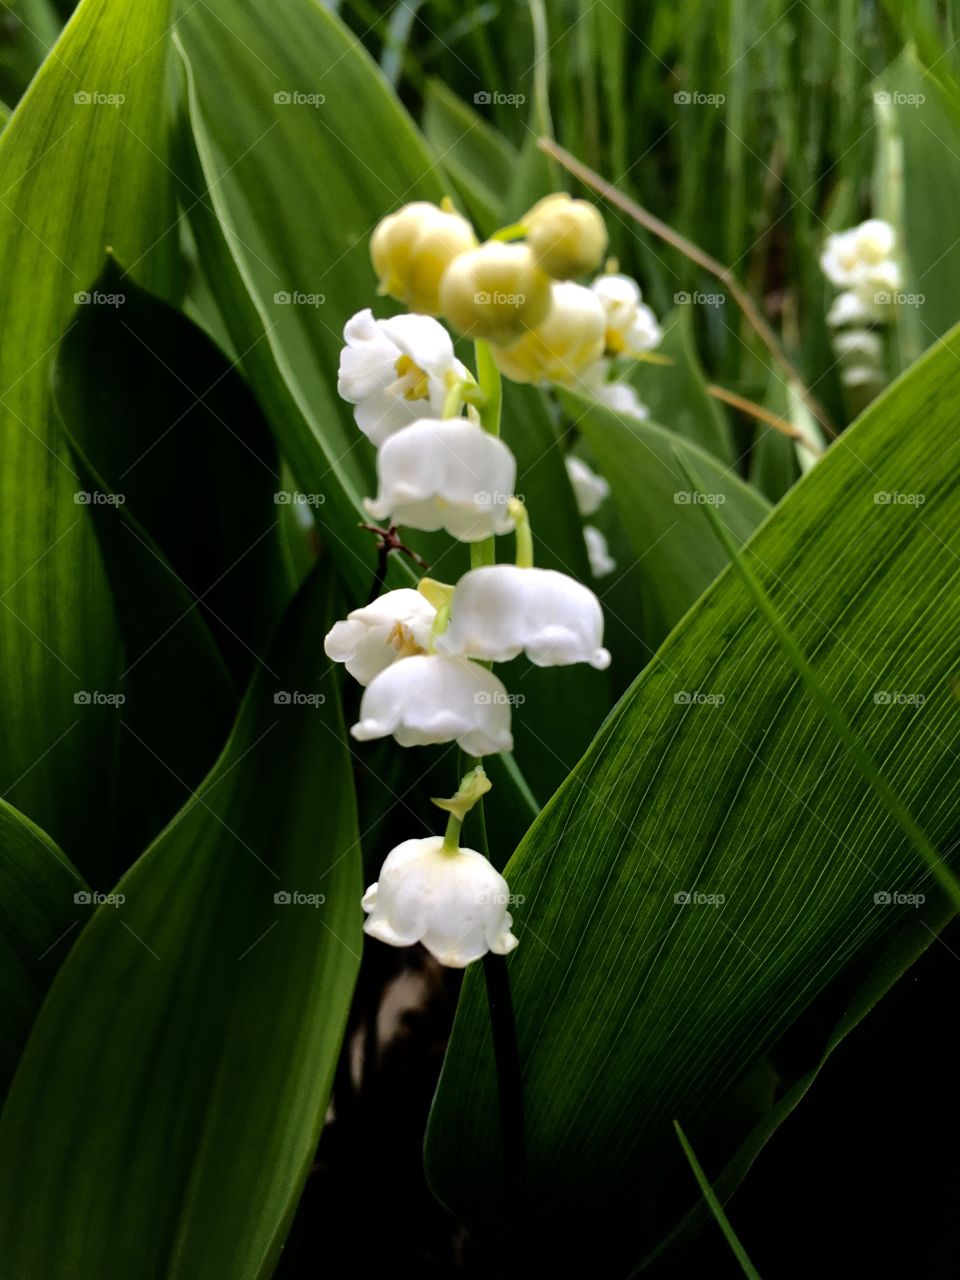 Lilies of the Valley